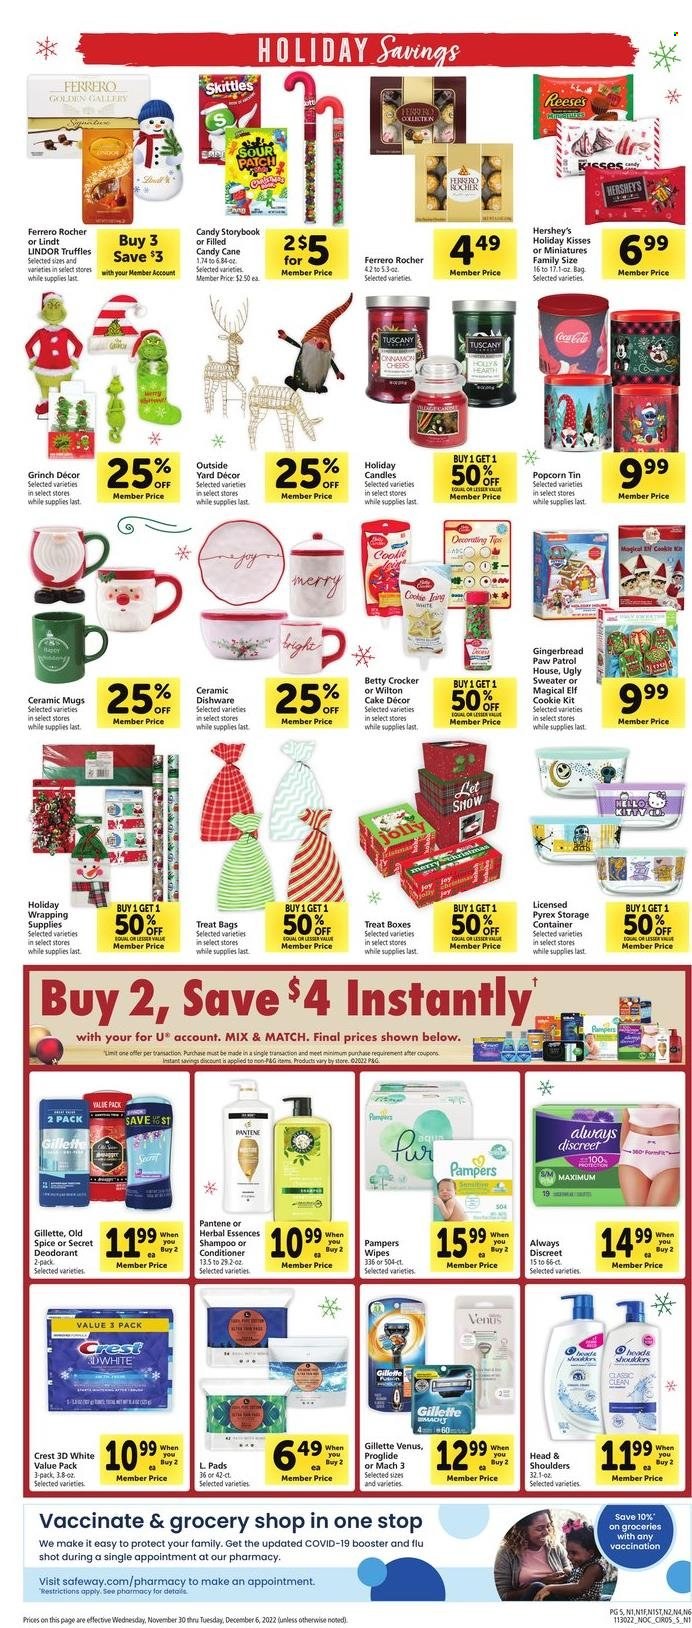 thumbnail - Safeway Flyer - 11/30/2022 - 12/06/2022 - Sales products - gingerbread, Reese's, Hershey's, Paw Patrol, candy cane, Lindt, Lindor, Ferrero Rocher, truffles, UglyDolls, sour patch, popcorn, spice, Coca-Cola, wipes, Joy, shampoo, Old Spice, Crest, conditioner, Head & Shoulders, Pantene, Herbal Essences, Gillette, Venus, Pyrex, ceramic mugs, container, storage box, Hello Kitty, candle, Elf. Page 5.